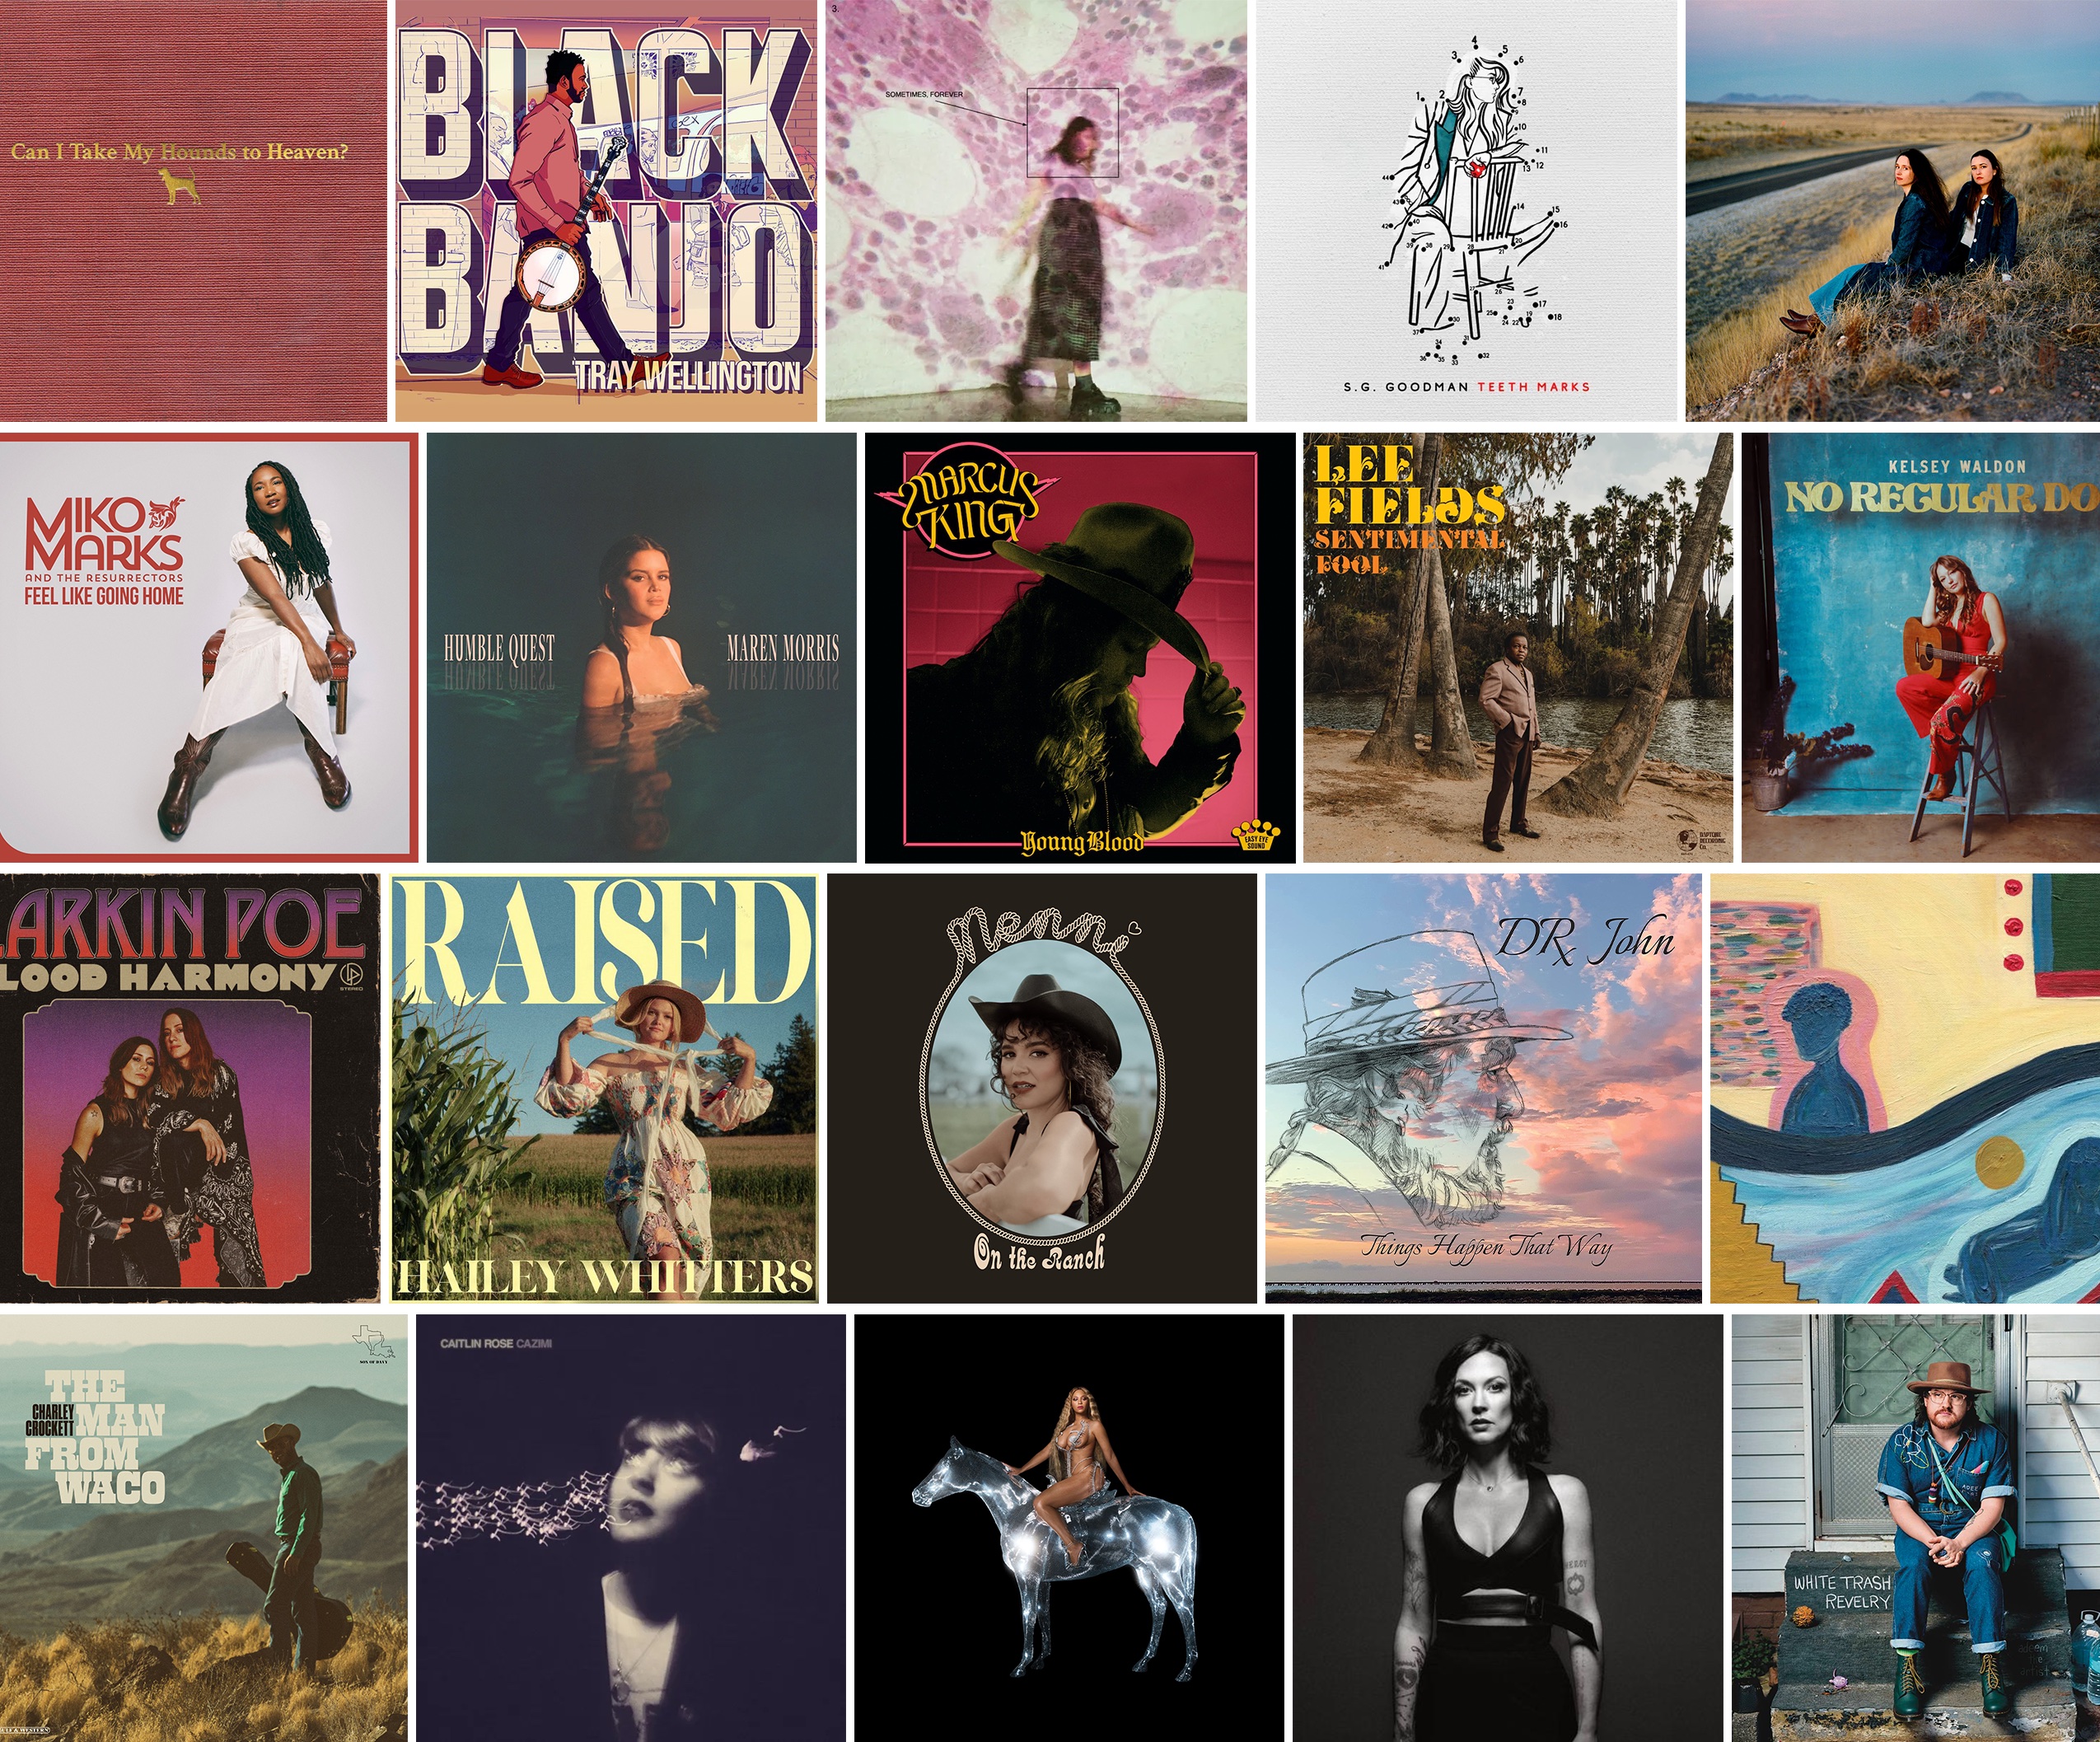 Rck: albums, songs, playlists